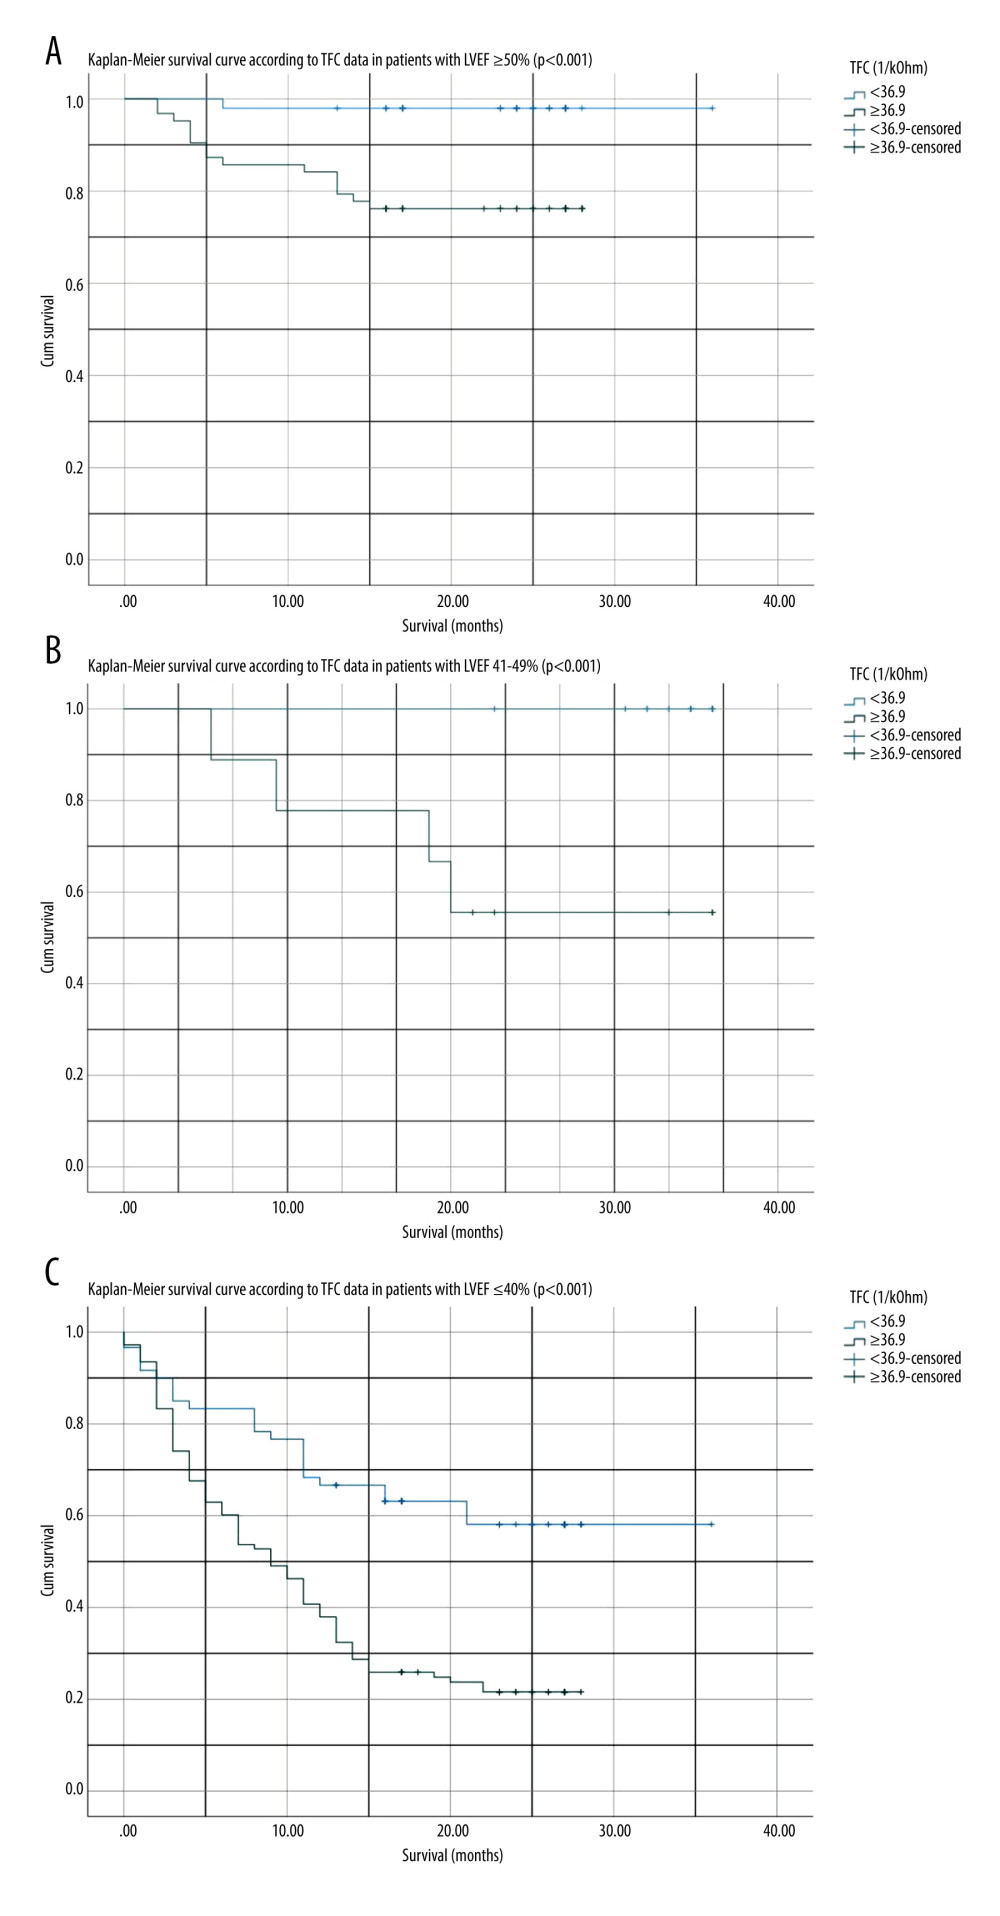 (A) Kaplan-Meier survival curve according to thoracic fluid content (TFC) in patients with left ventricular ejection fraction (LVEF) ≥50% throughout a maximum follow-up of 36 months. (B) Kaplan-Meier survival curve according to TFC in patients with LVEF 41–49% throughout a maximum follow-up of 27 months. (C) Kaplan-Meier survival curve according to TFC in patients with LVEF ≤40% throughout a maximal follow-up of 36 months. Figures generated by SPSS version 27.0 (IBM Corp, Armonk, USA).